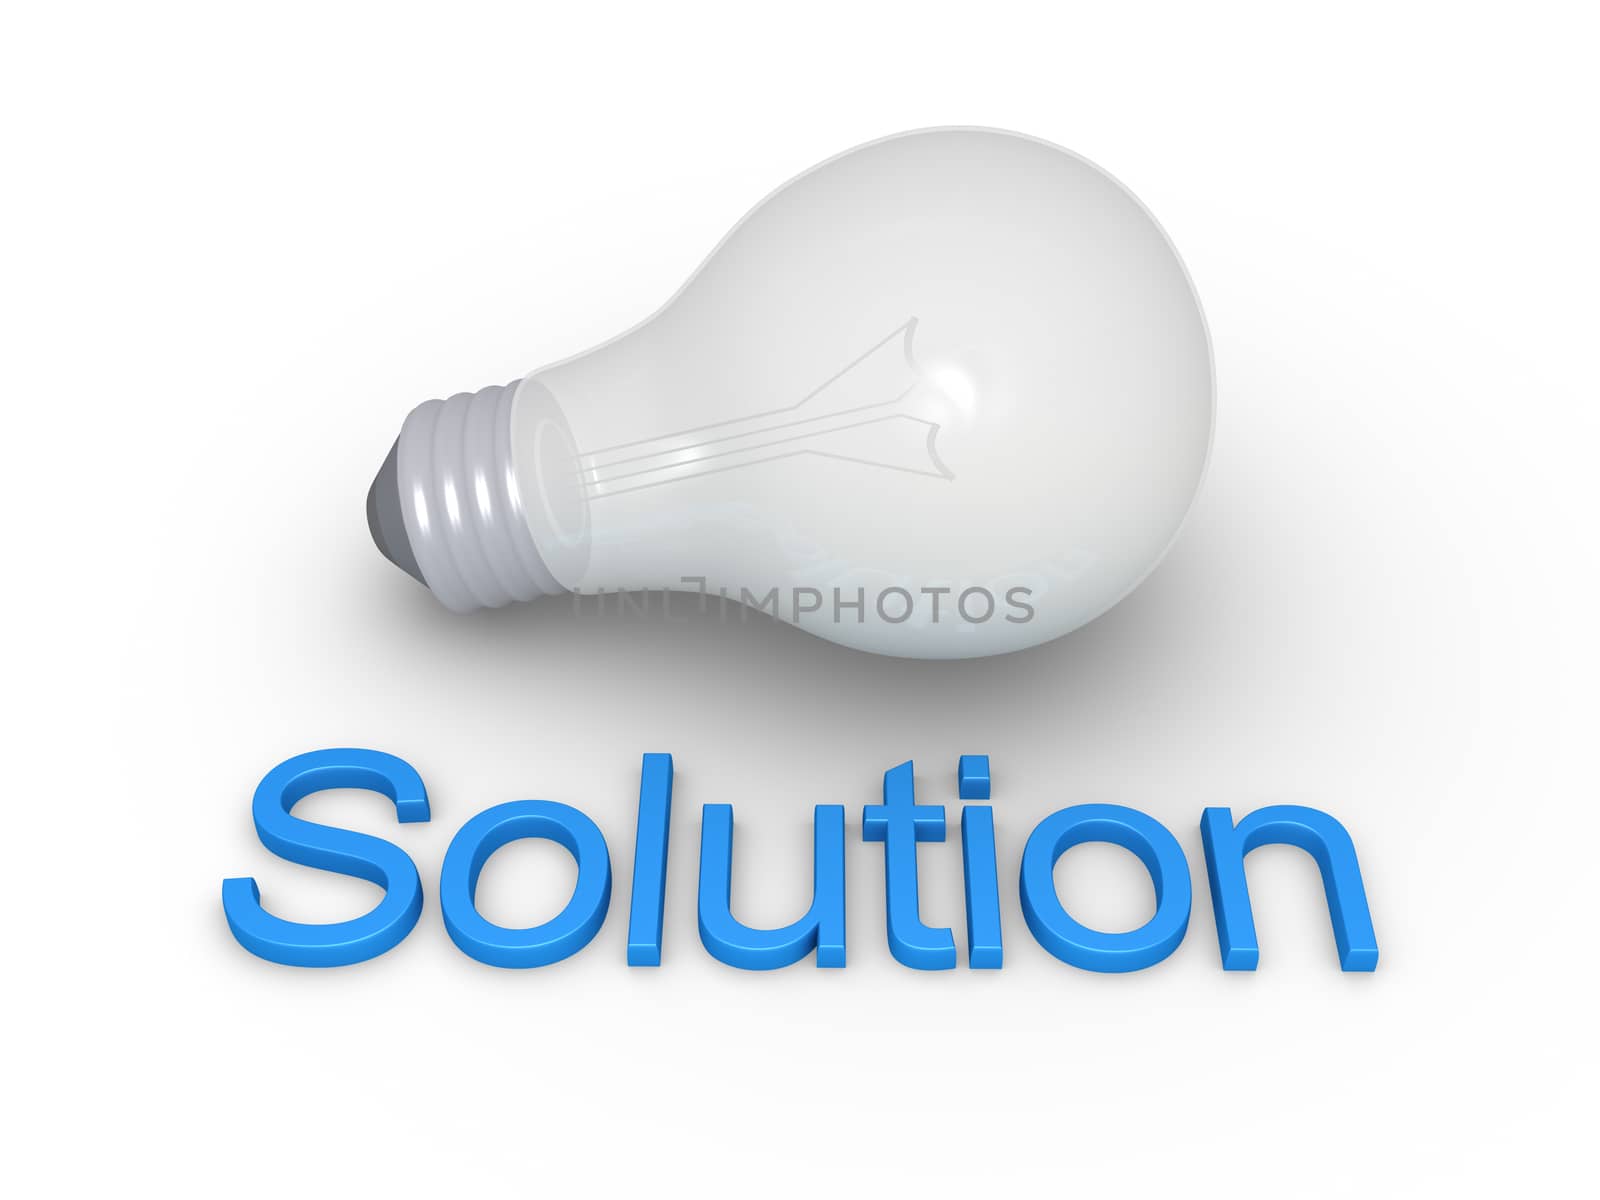 Light bulb and Solution word by 6kor3dos